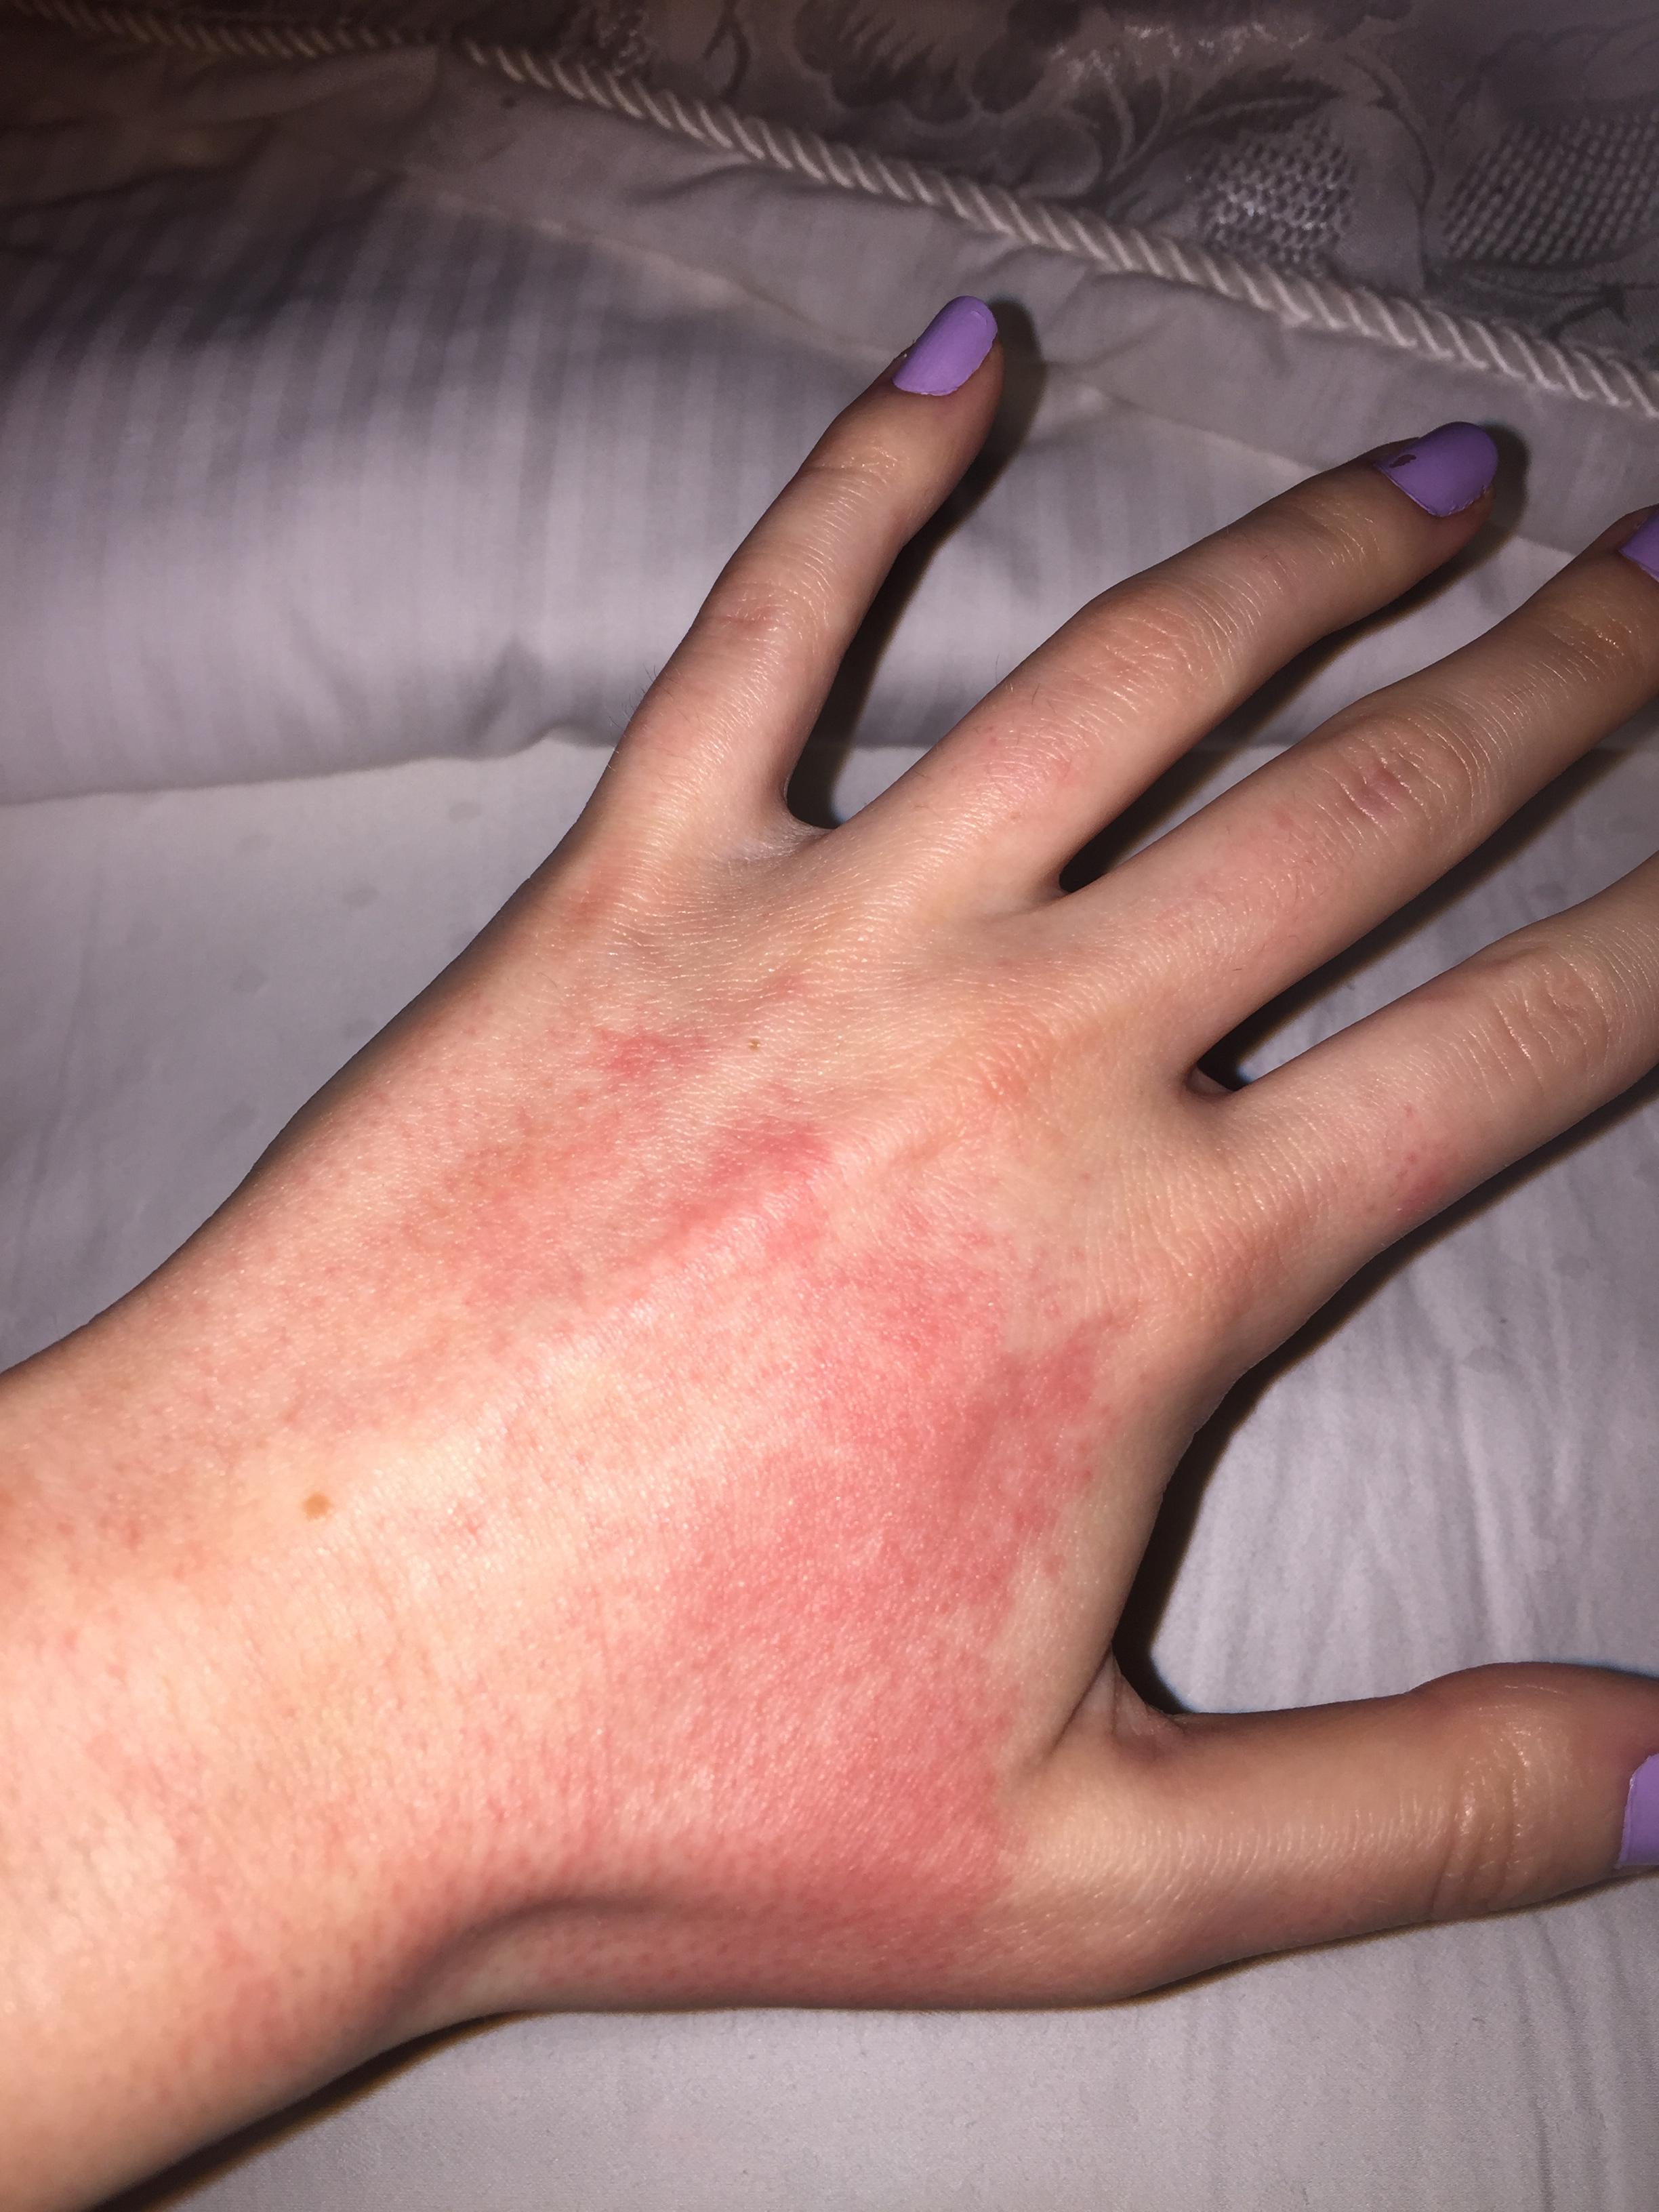 Why do my hands have a rash